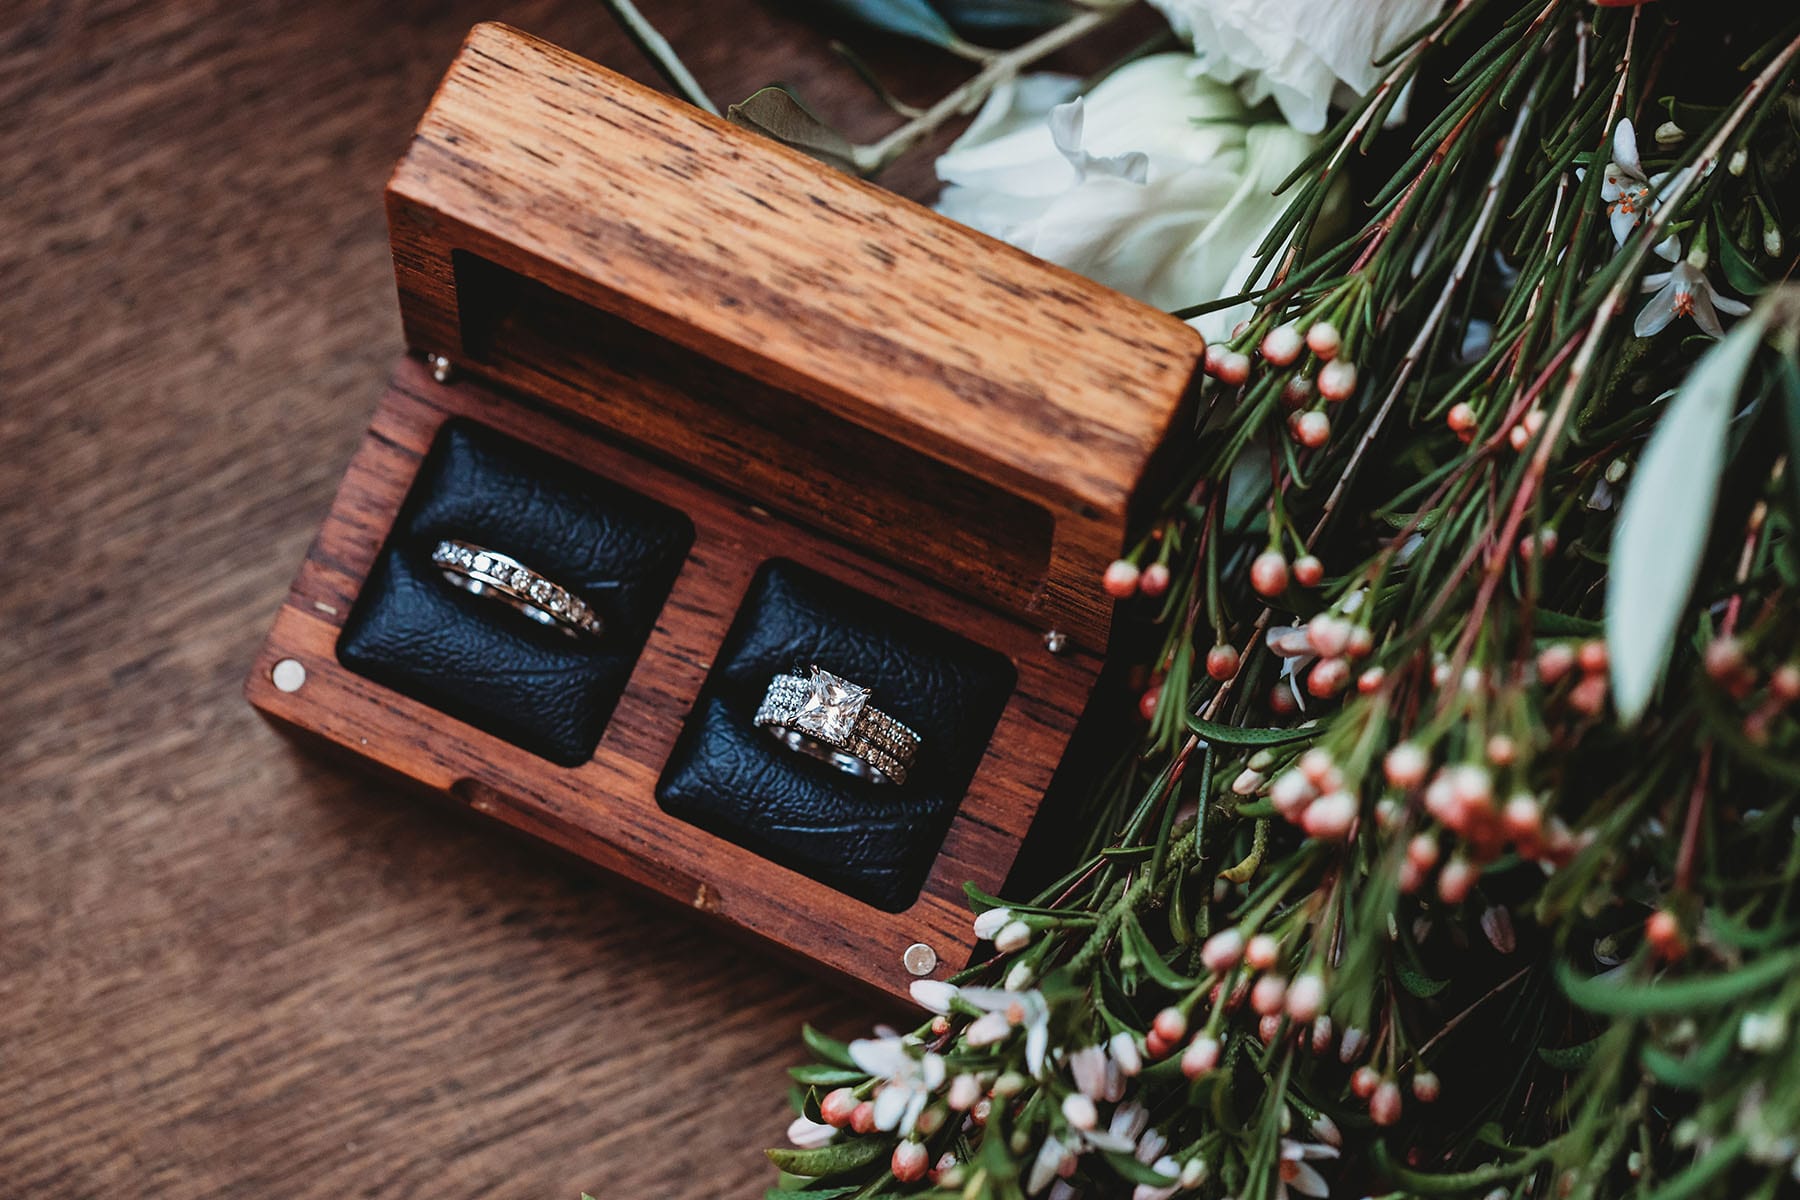 Details, wedding rings in a timber box sitting in the bridal bouquet